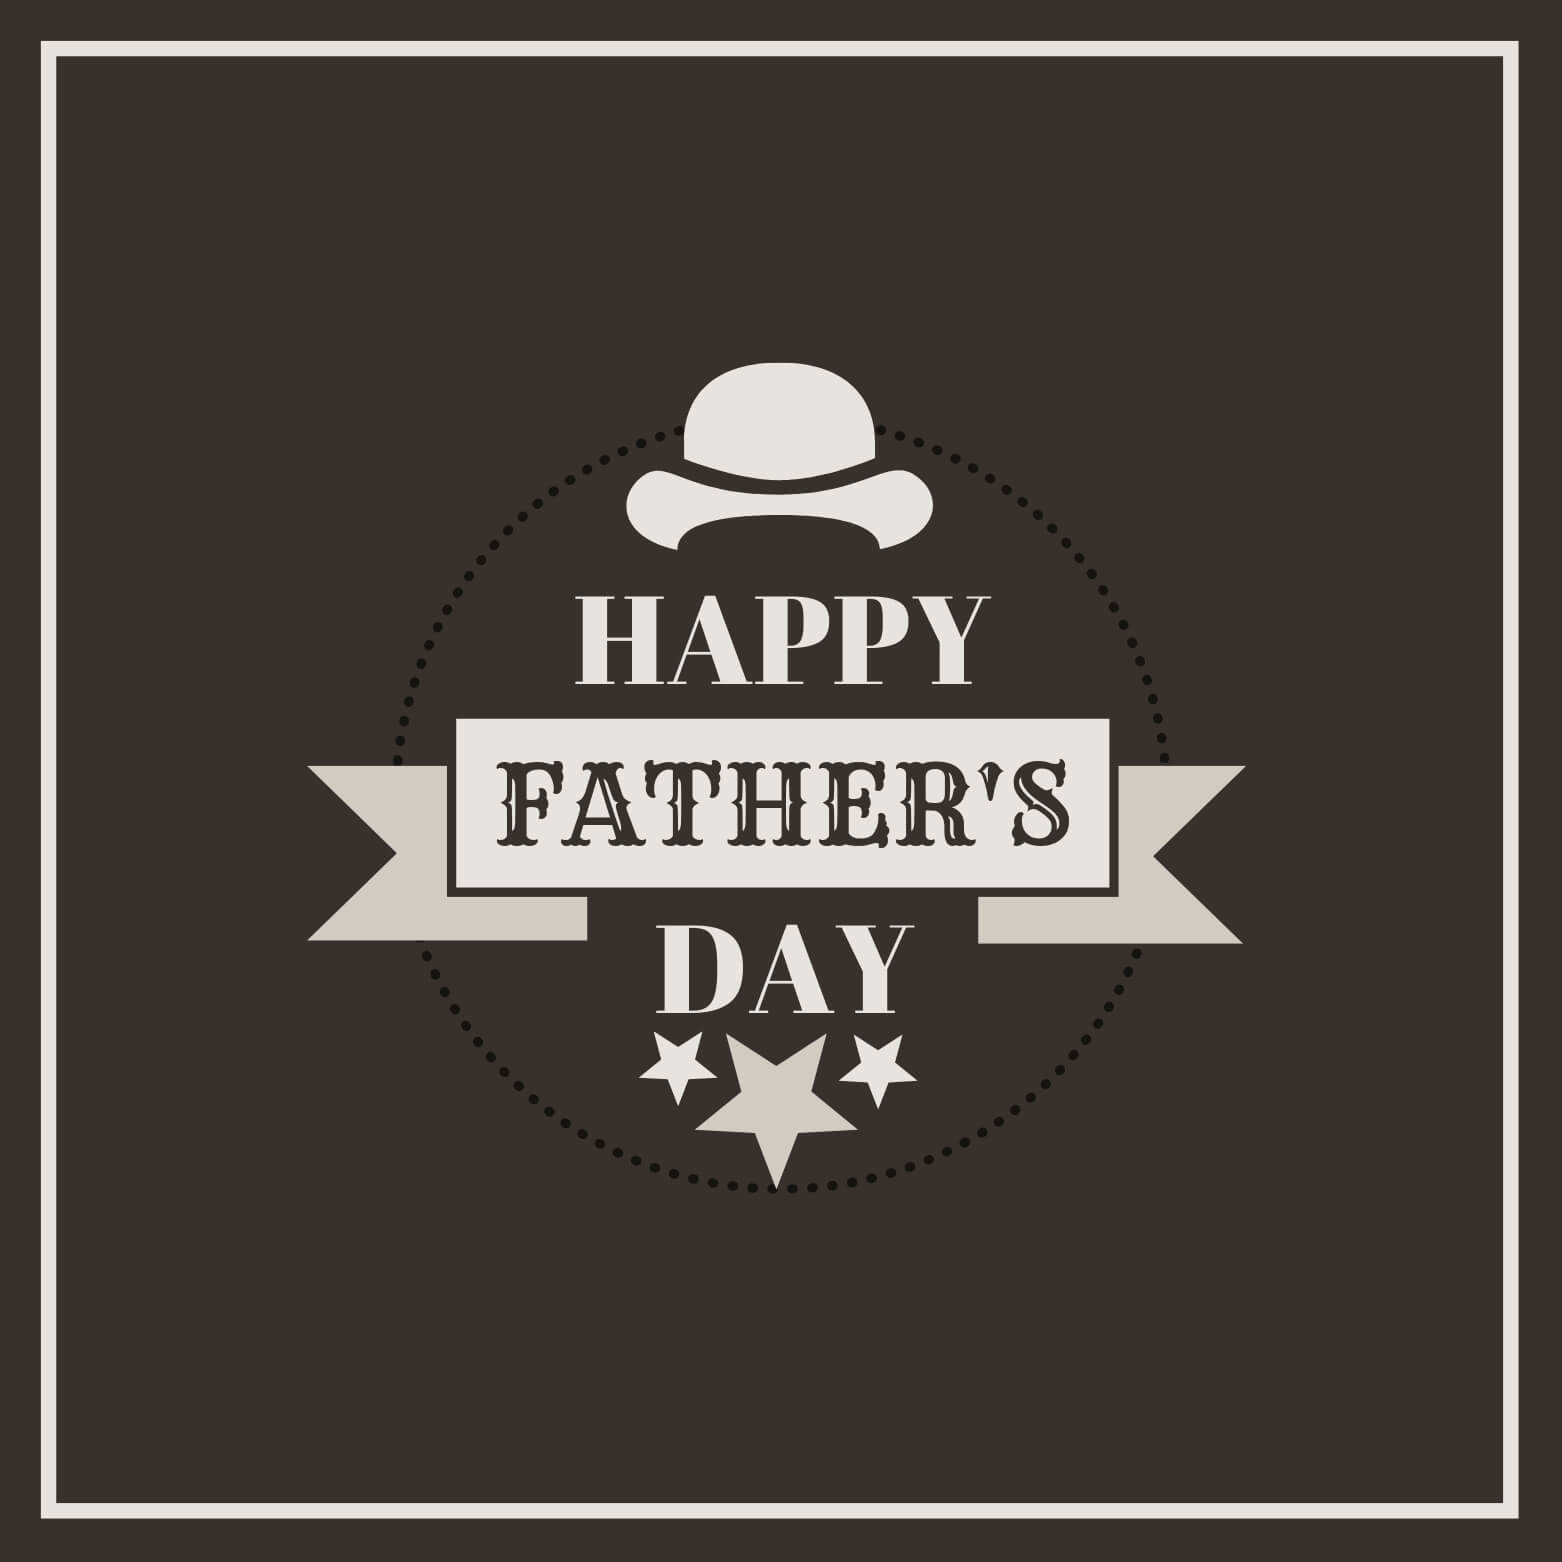 15+ Fun Father's Day Card Templates To Show Your Dad He's #1 Within Fathers Day Card Template